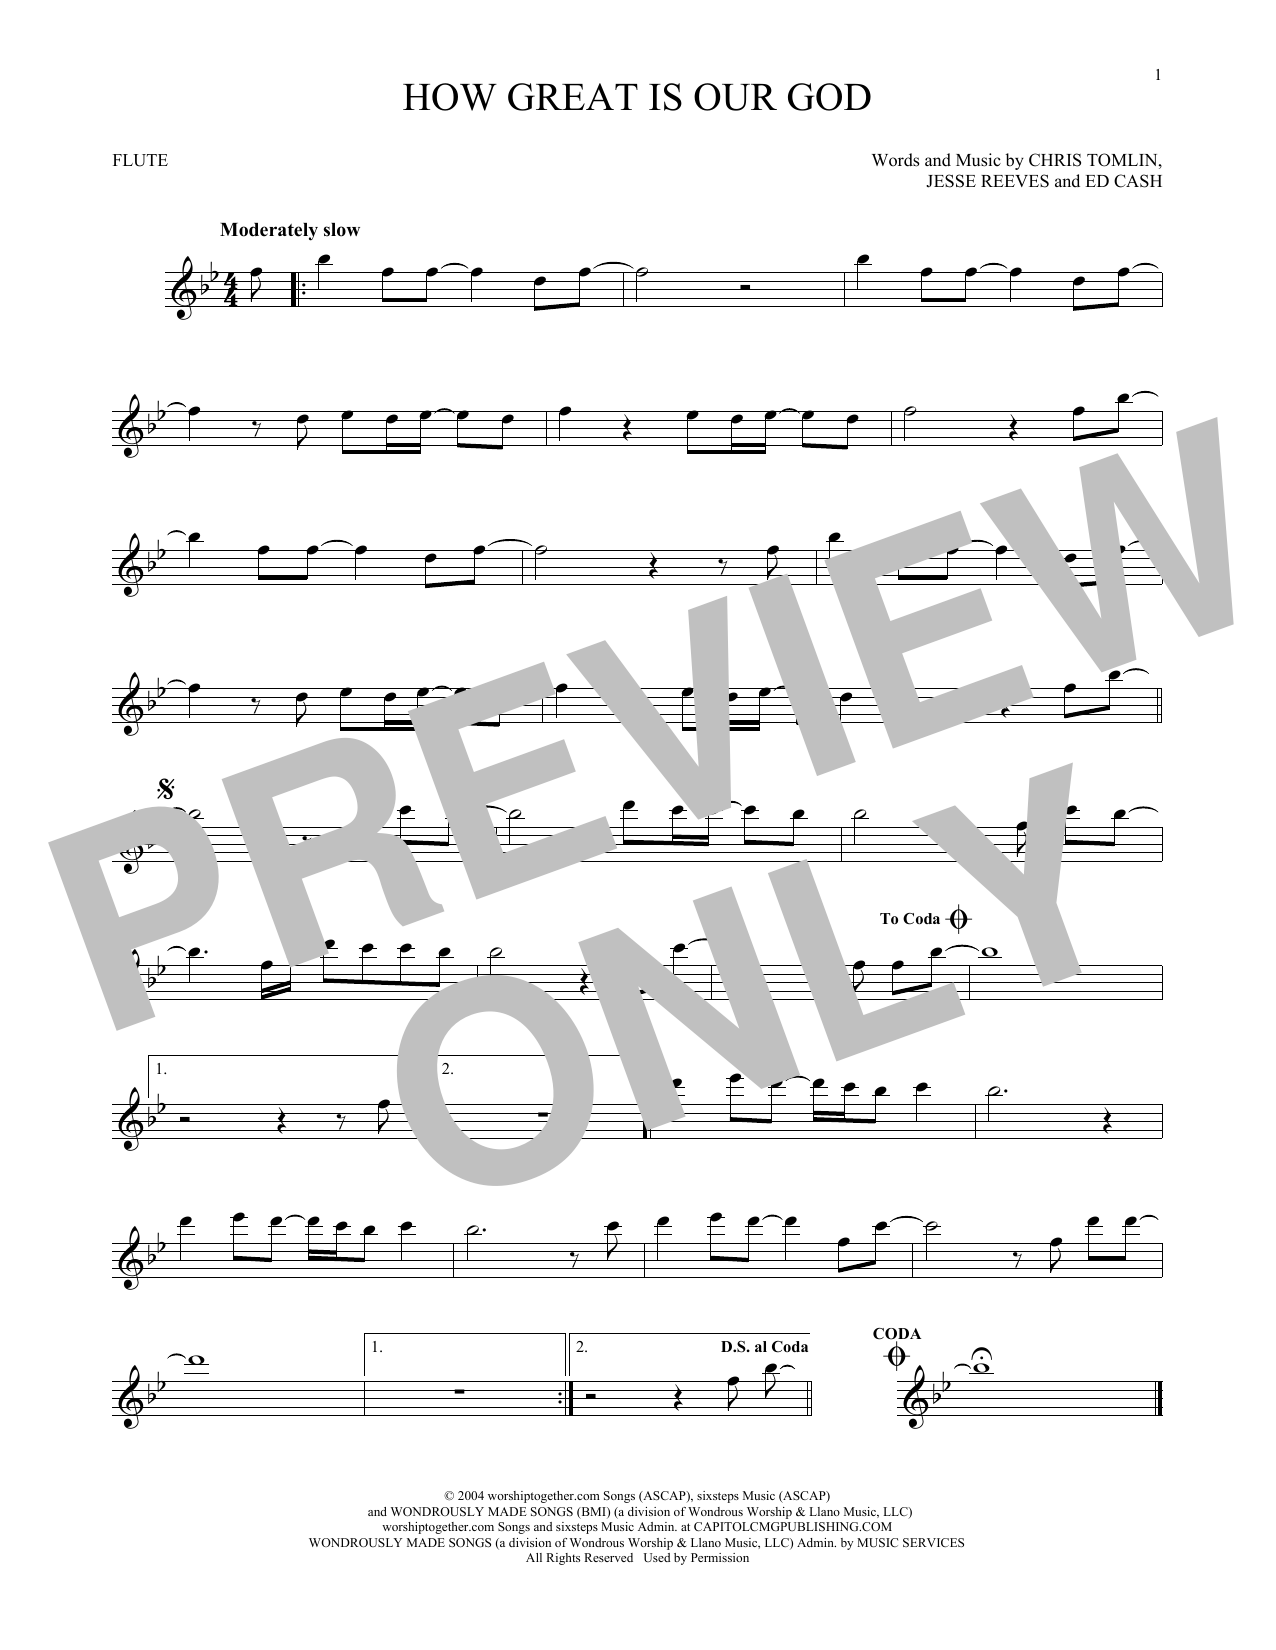 Chris Tomlin How Great Is Our God sheet music notes printable PDF score